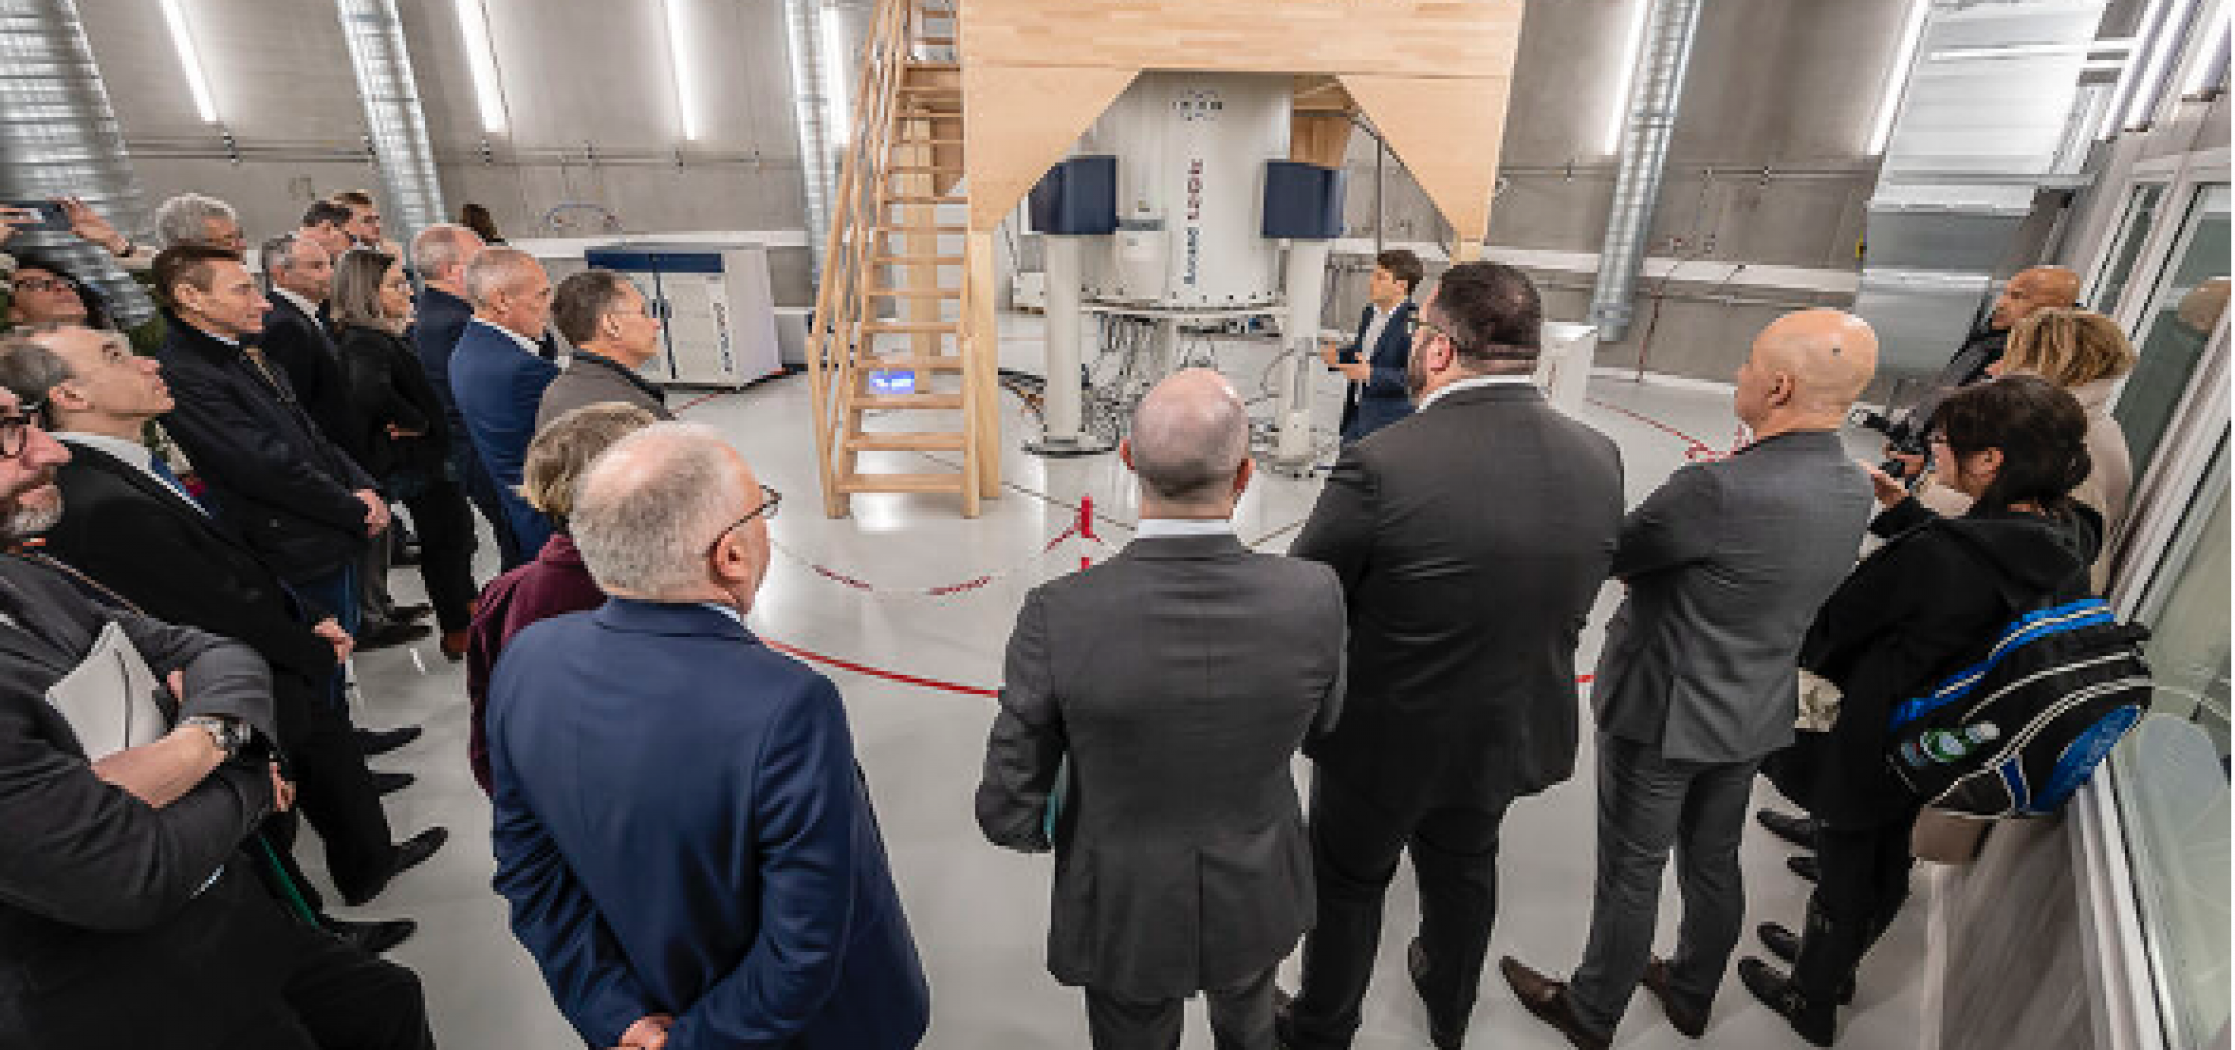 Inauguration of the 1,2 GHz NMR spectrometer on January 4, 2023 at the Lille site